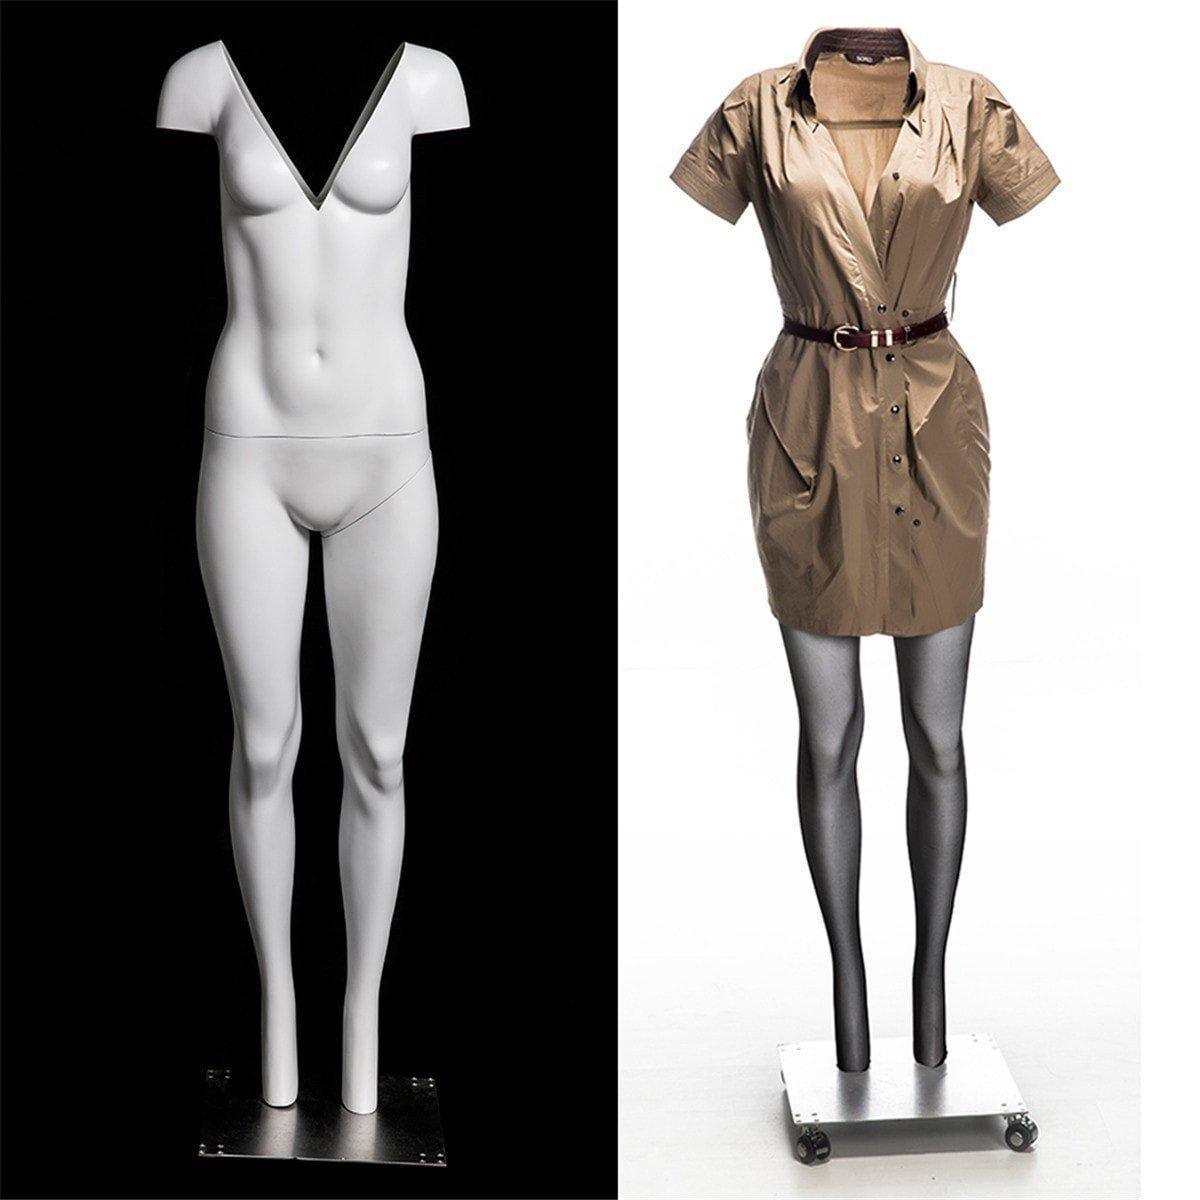 Female Invisible Ghost Mannequin Full Body for Photography (Version 1.0A) MM-MZGH1